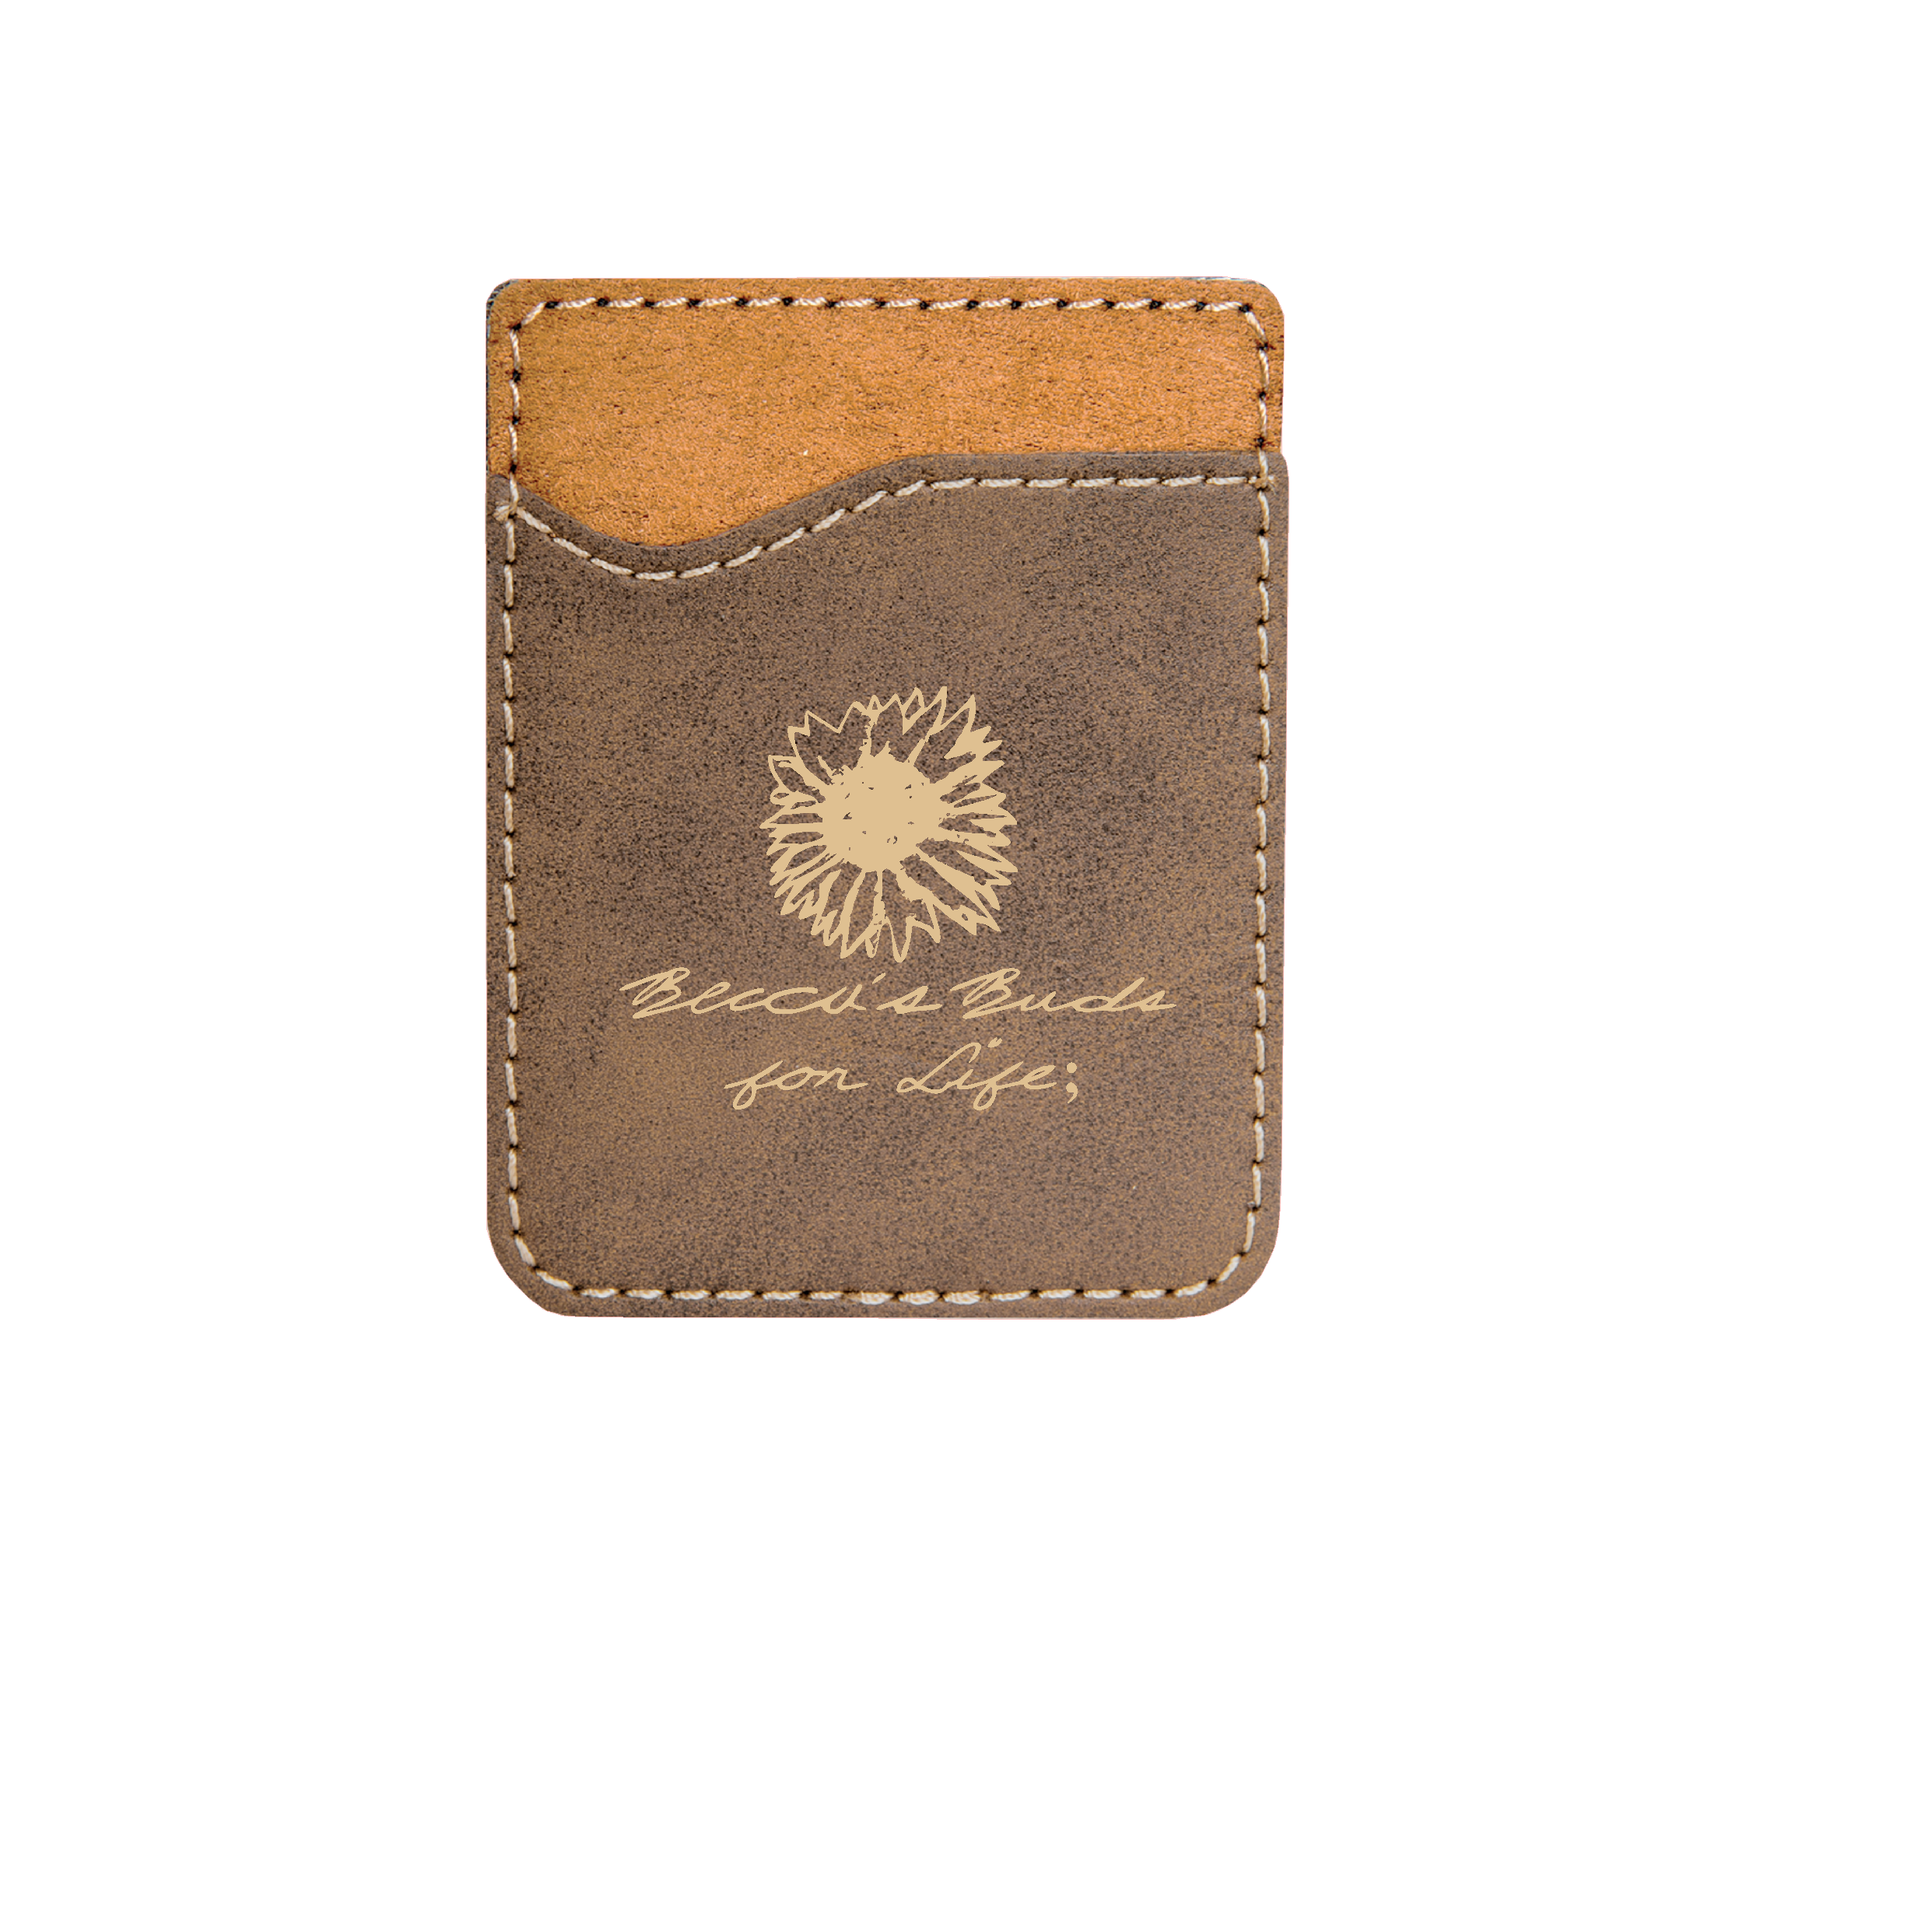 Beccas Buds For Life Rustic Phone Wallet